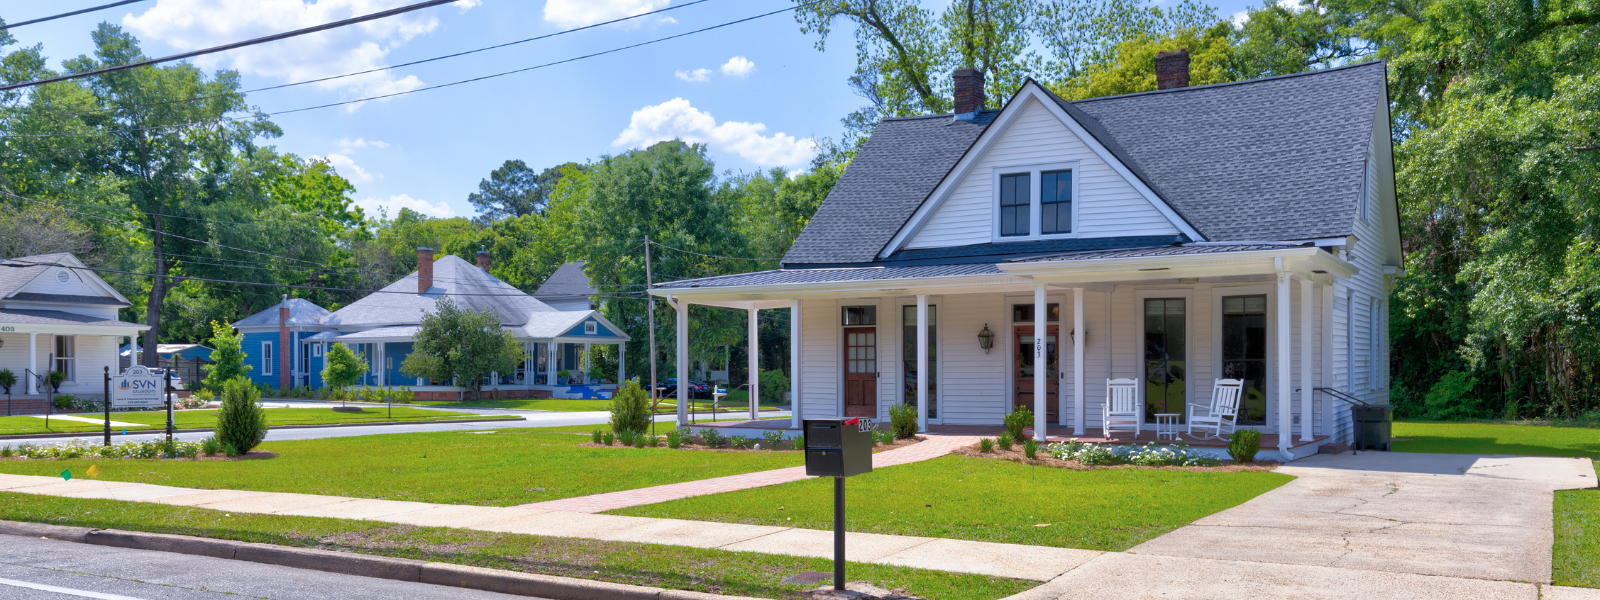 land real estate office in thomasville georgia